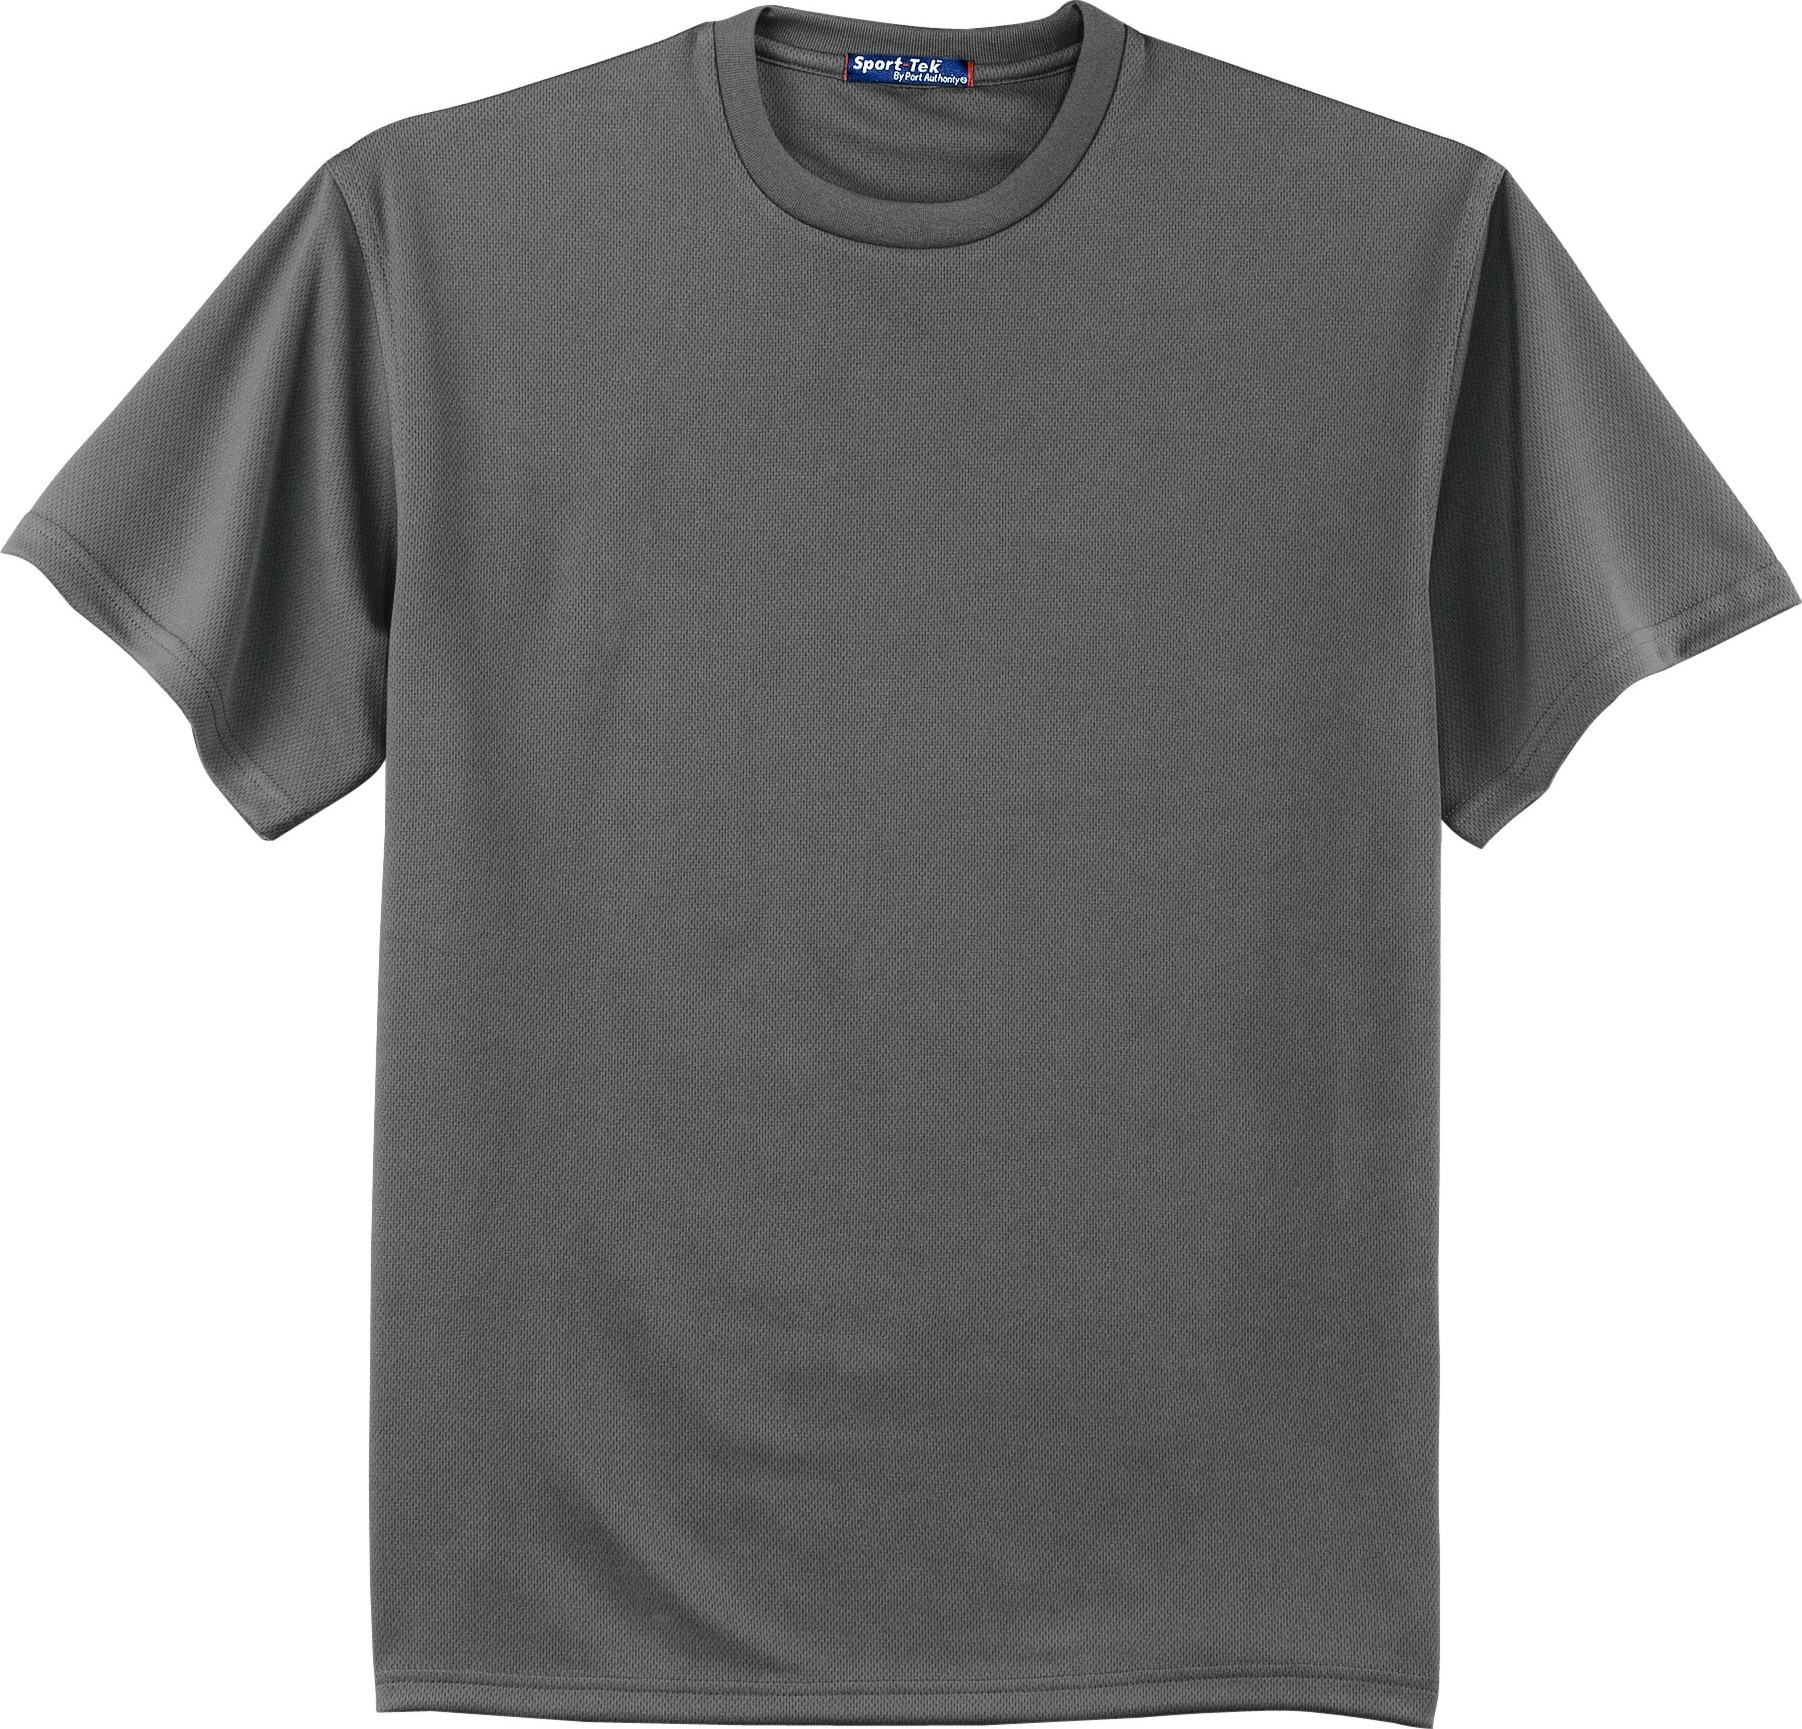 Free Blank T-shirt, Download Free Blank T-shirt png images, Free ...